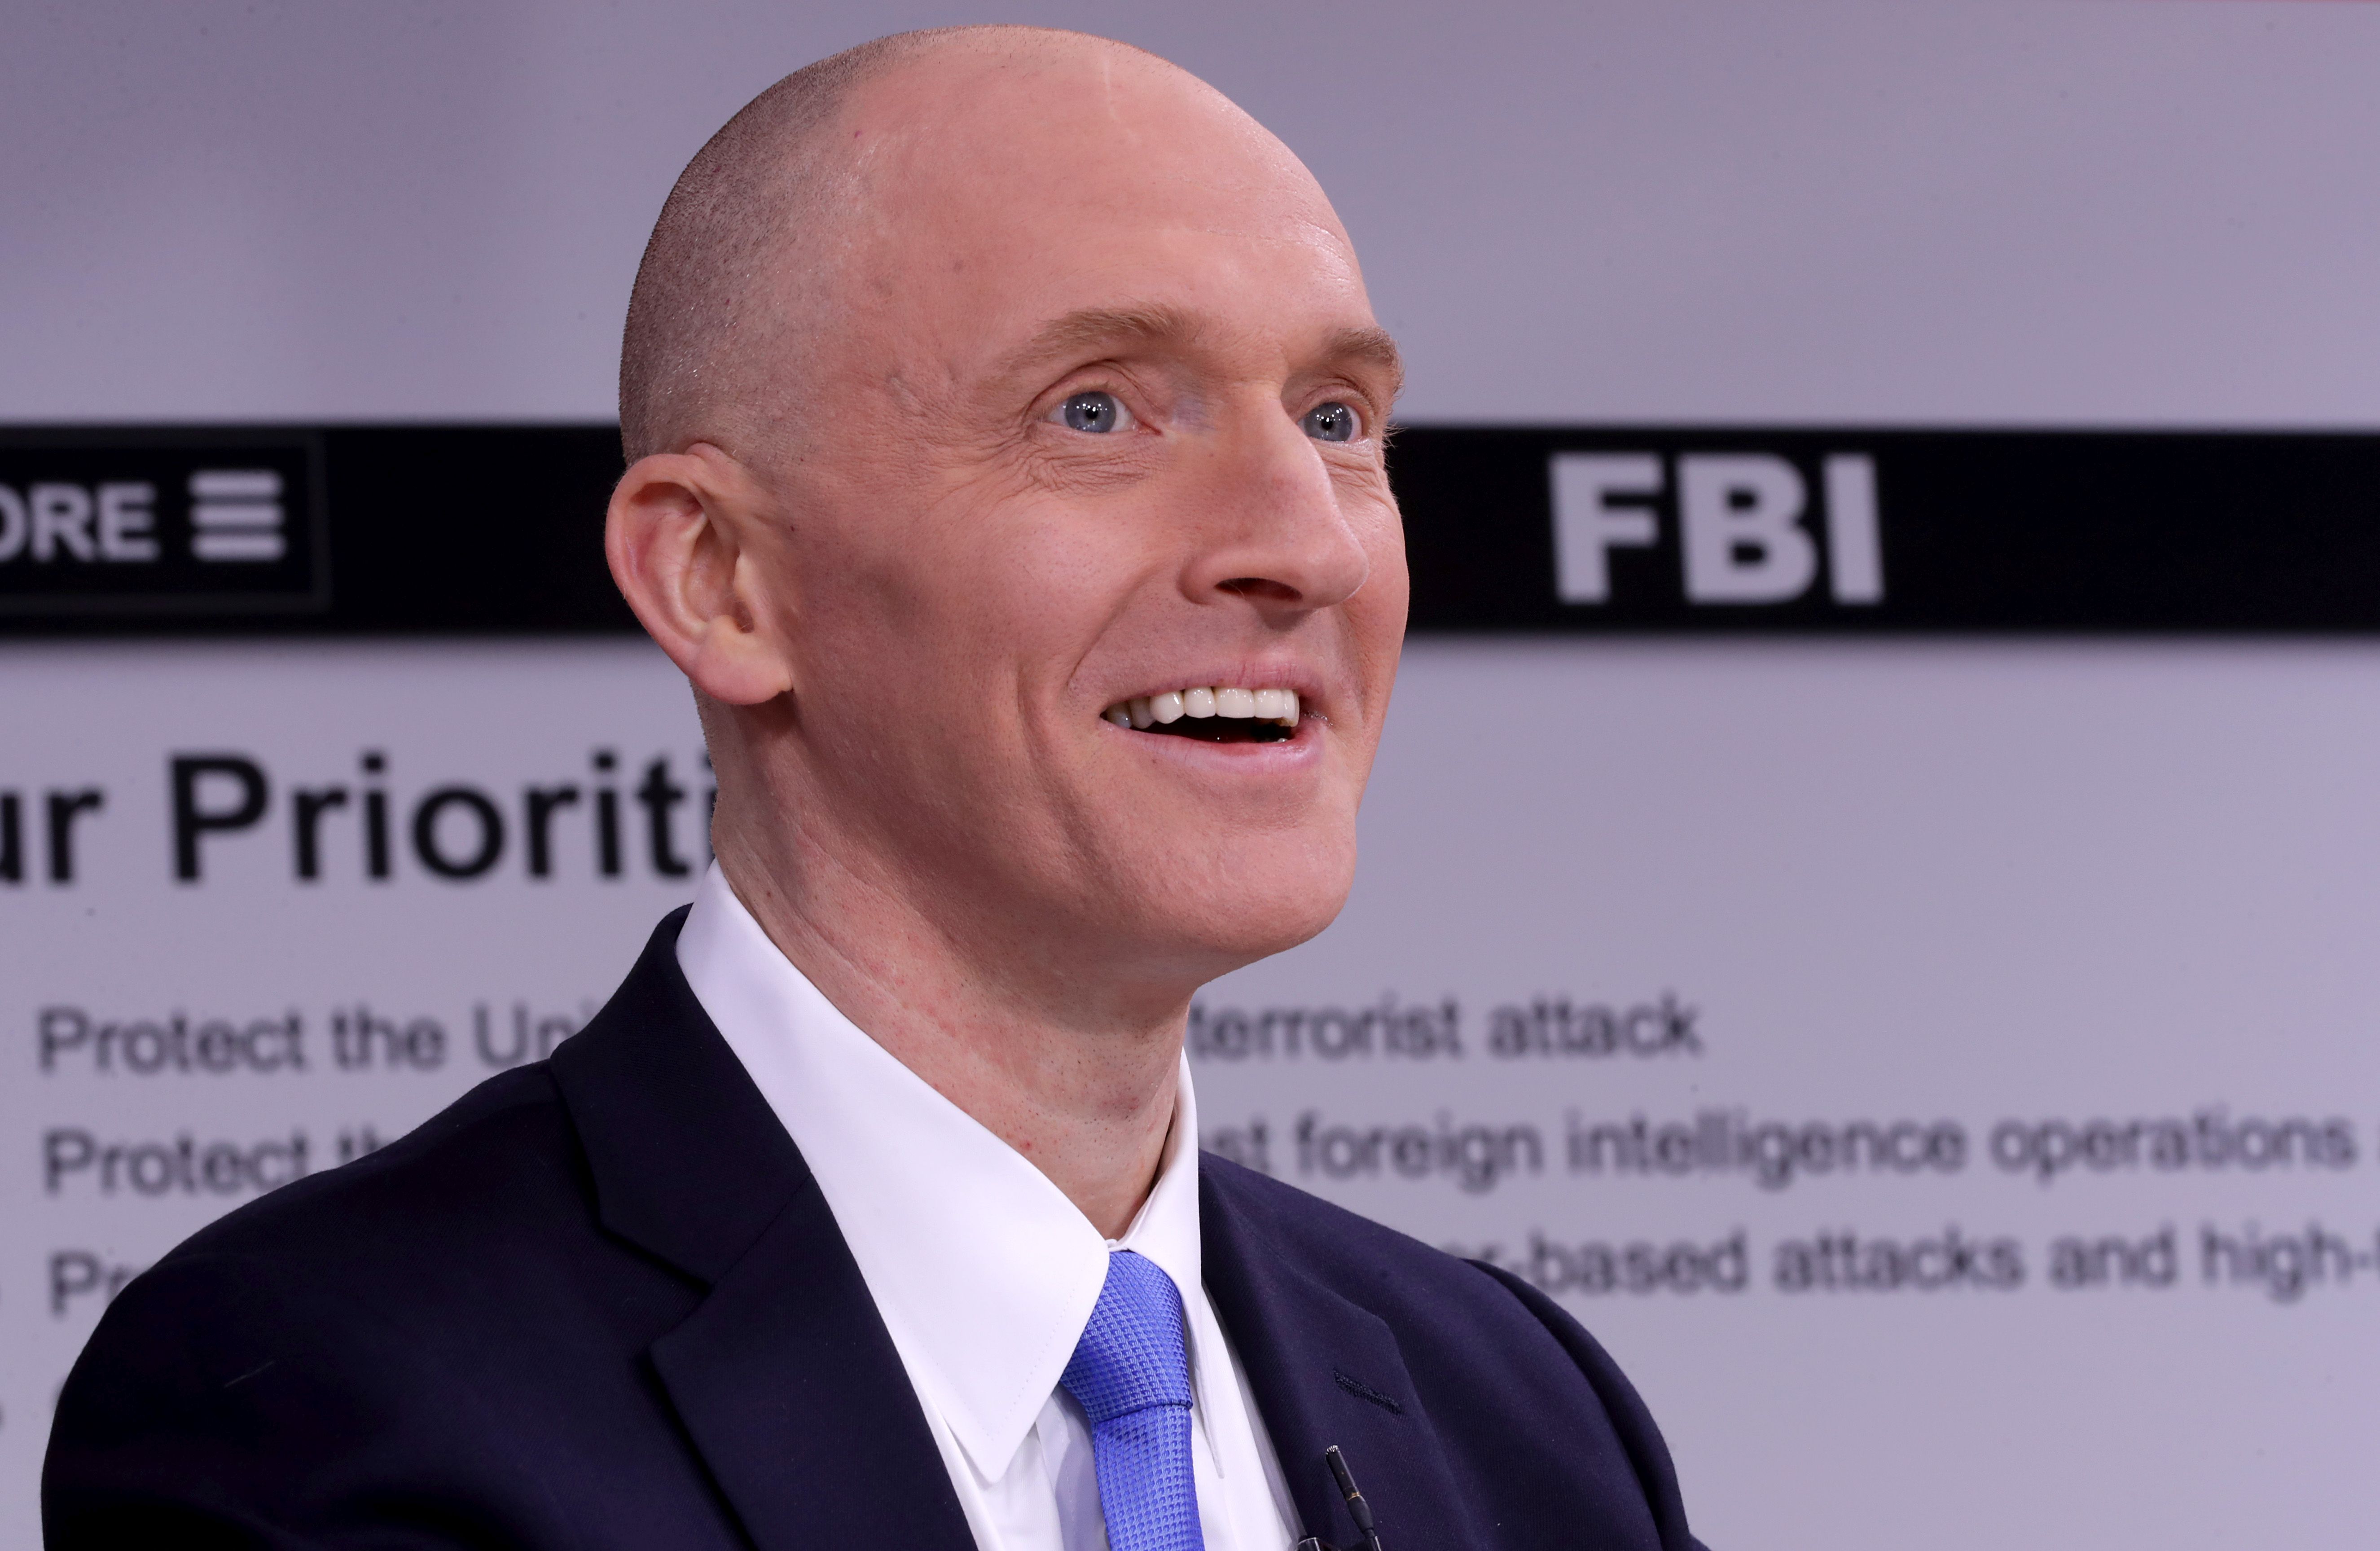 Dearie Carter Page